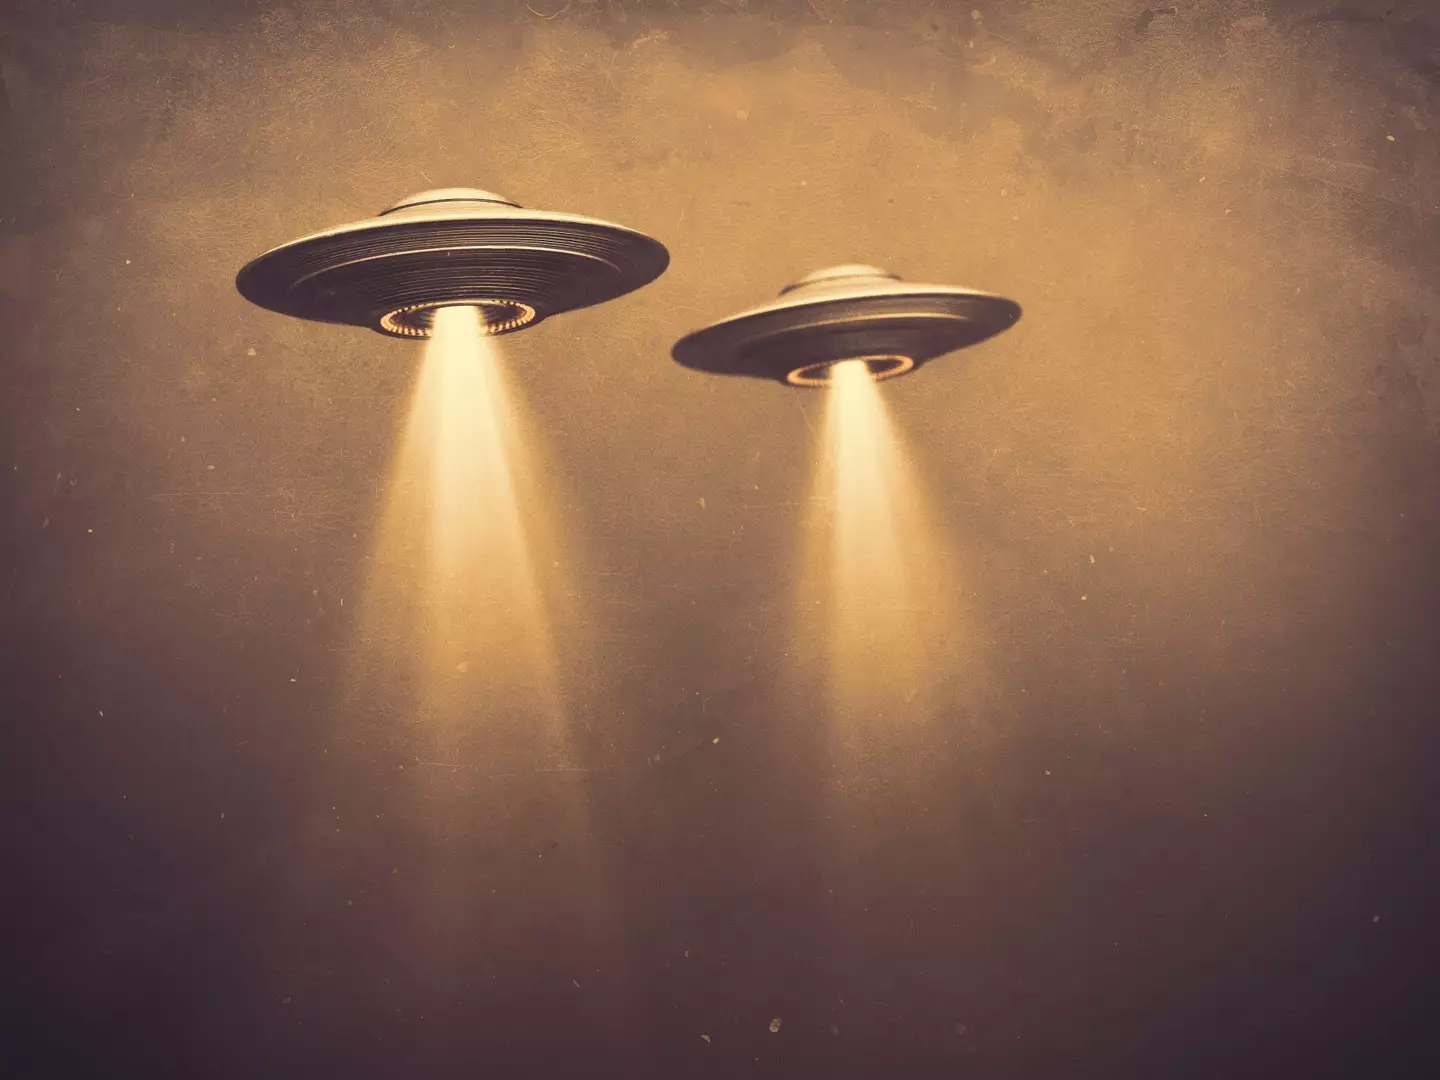 UFO sightings have been a topic of conversation for many years.